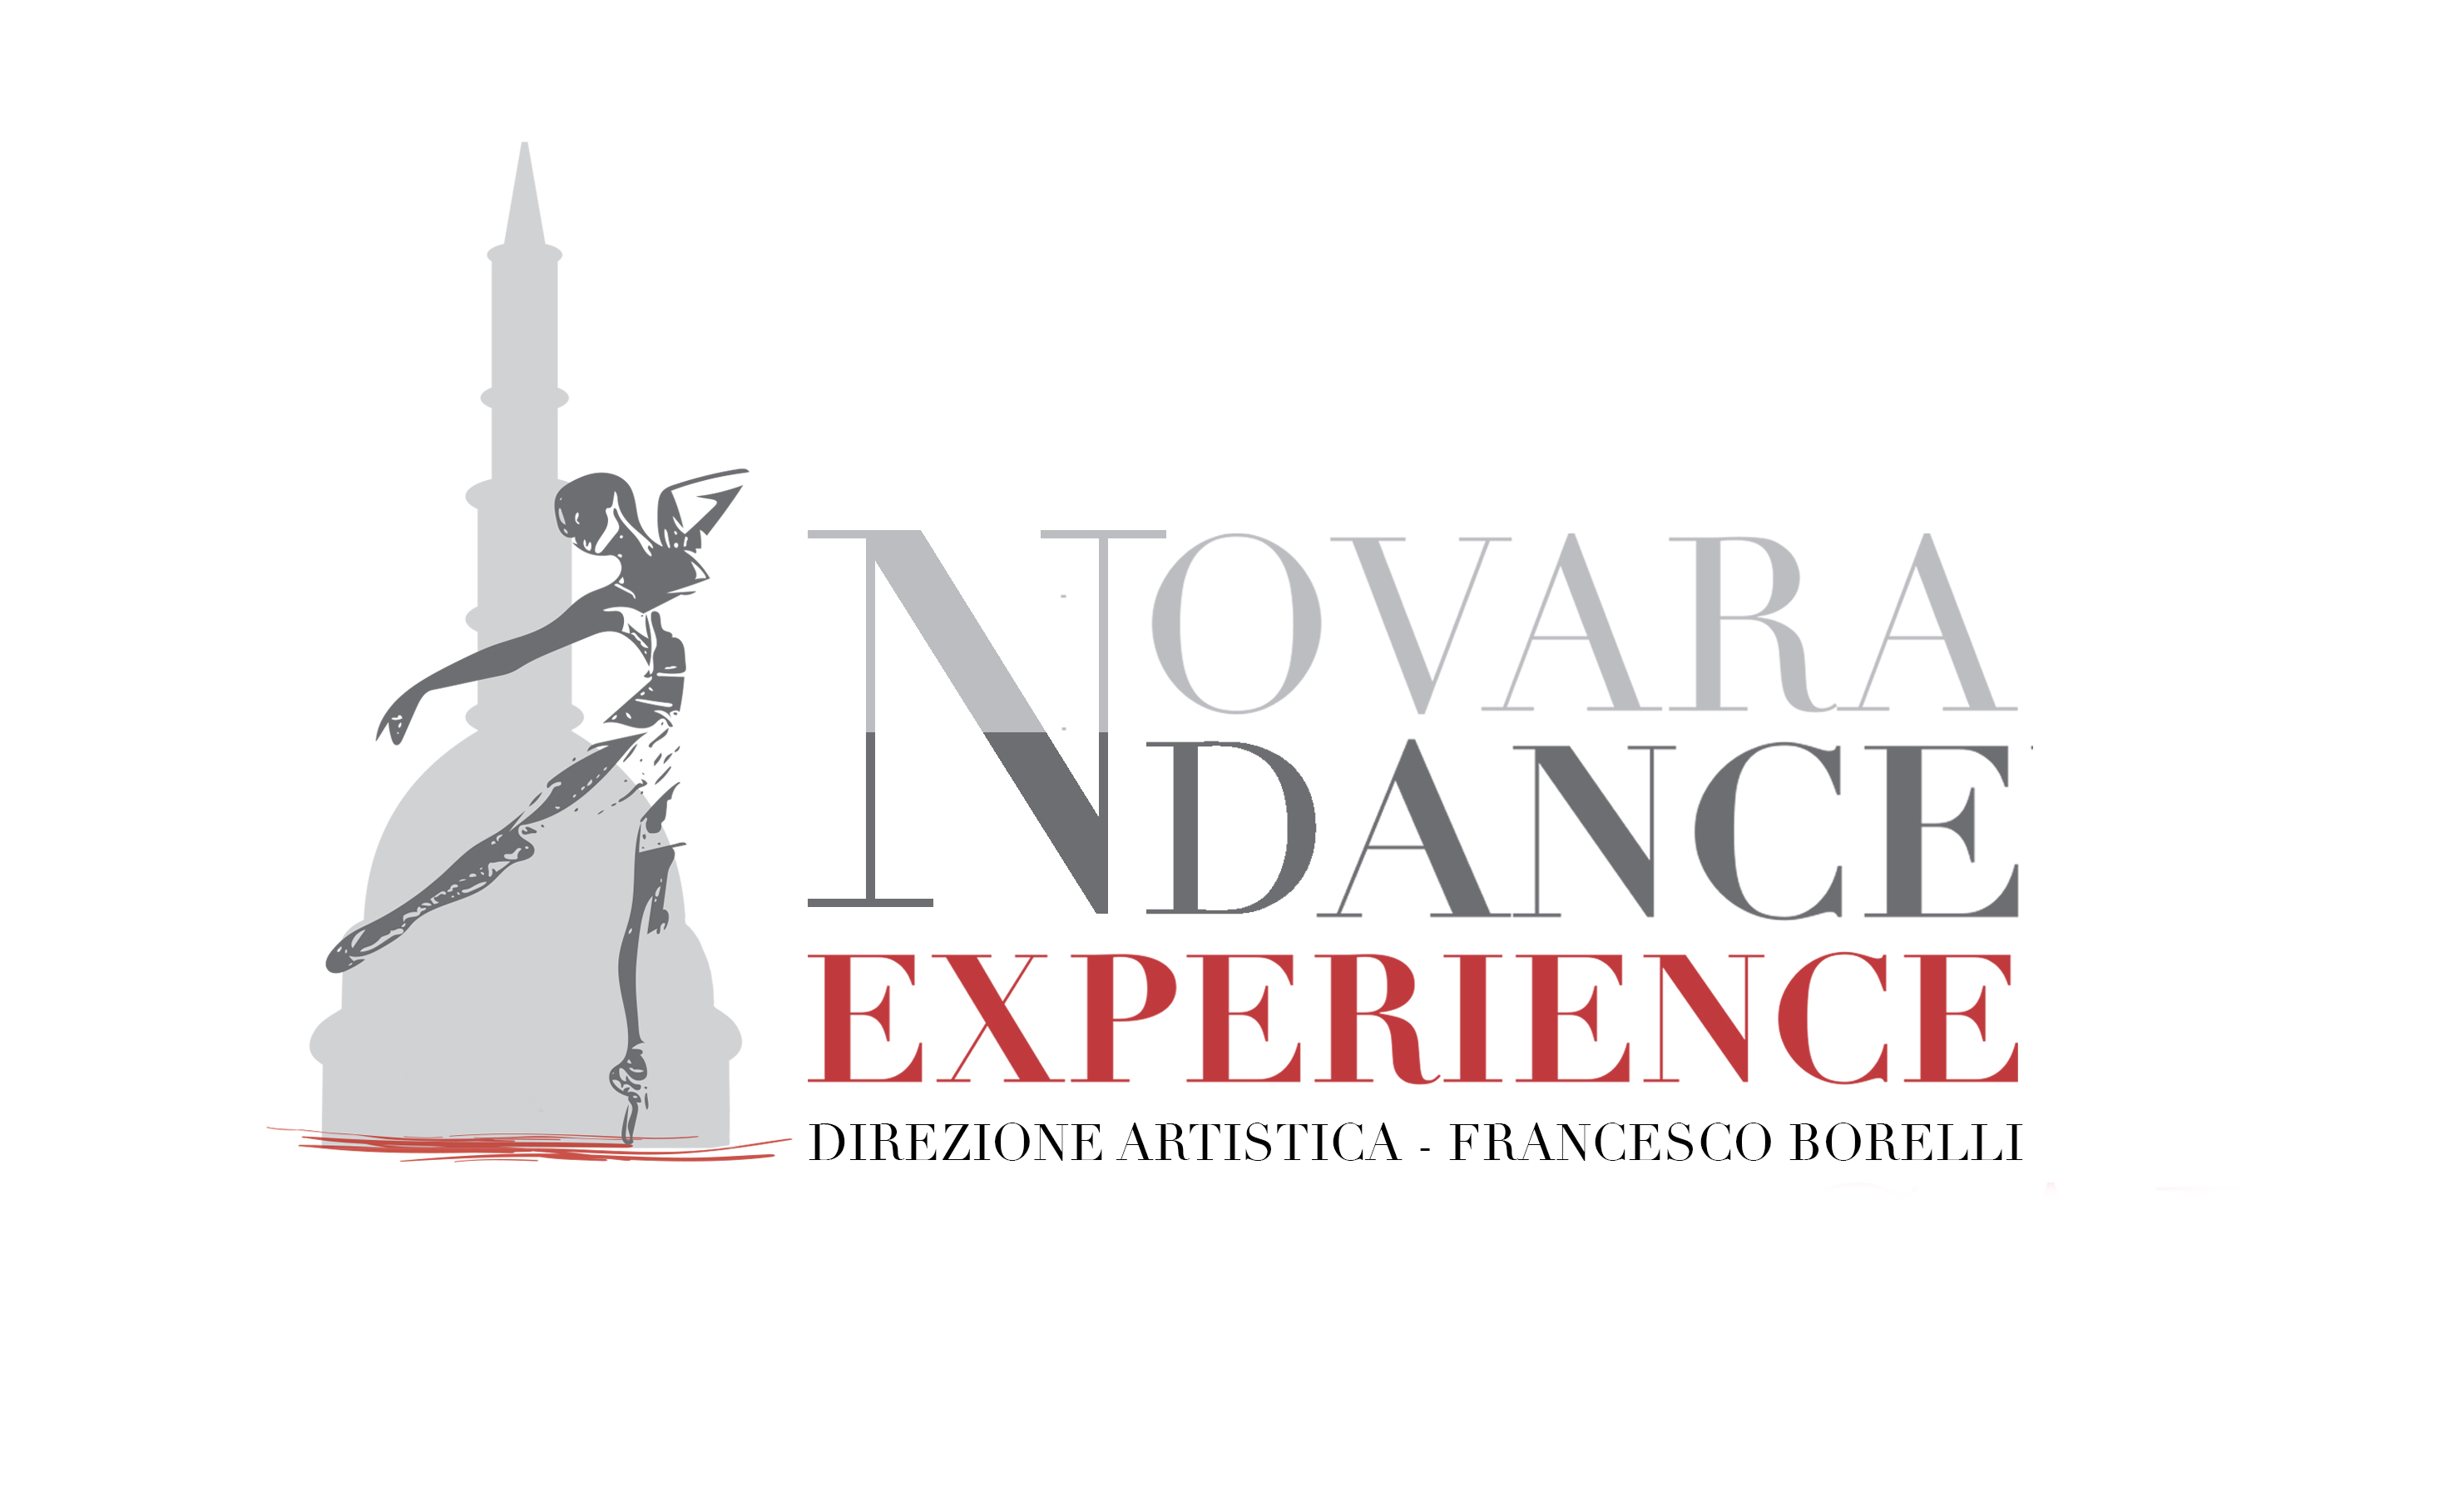 DANCE EXPERIENCE